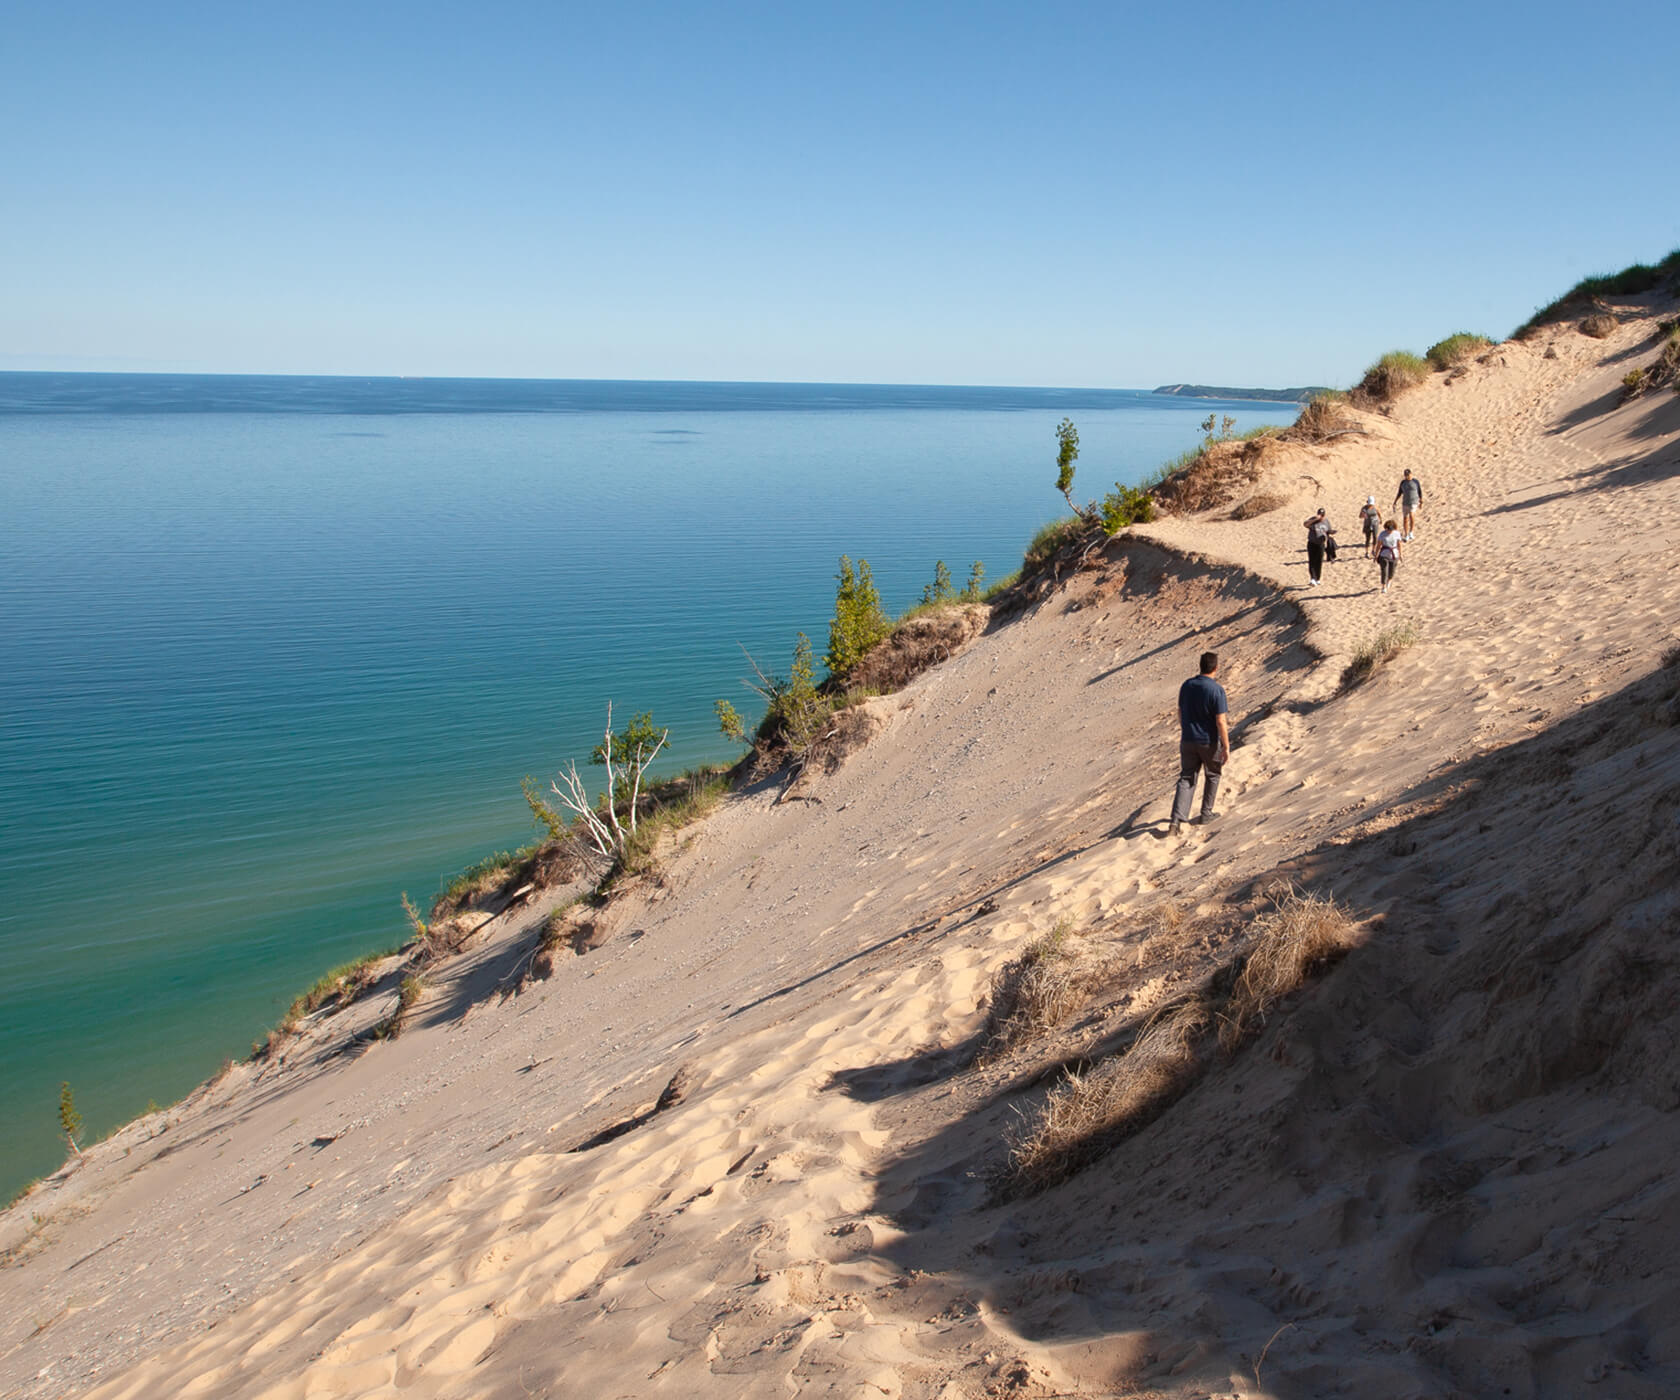 A group of people walk along a scenic, large sandy dune that runs along a shoreline.